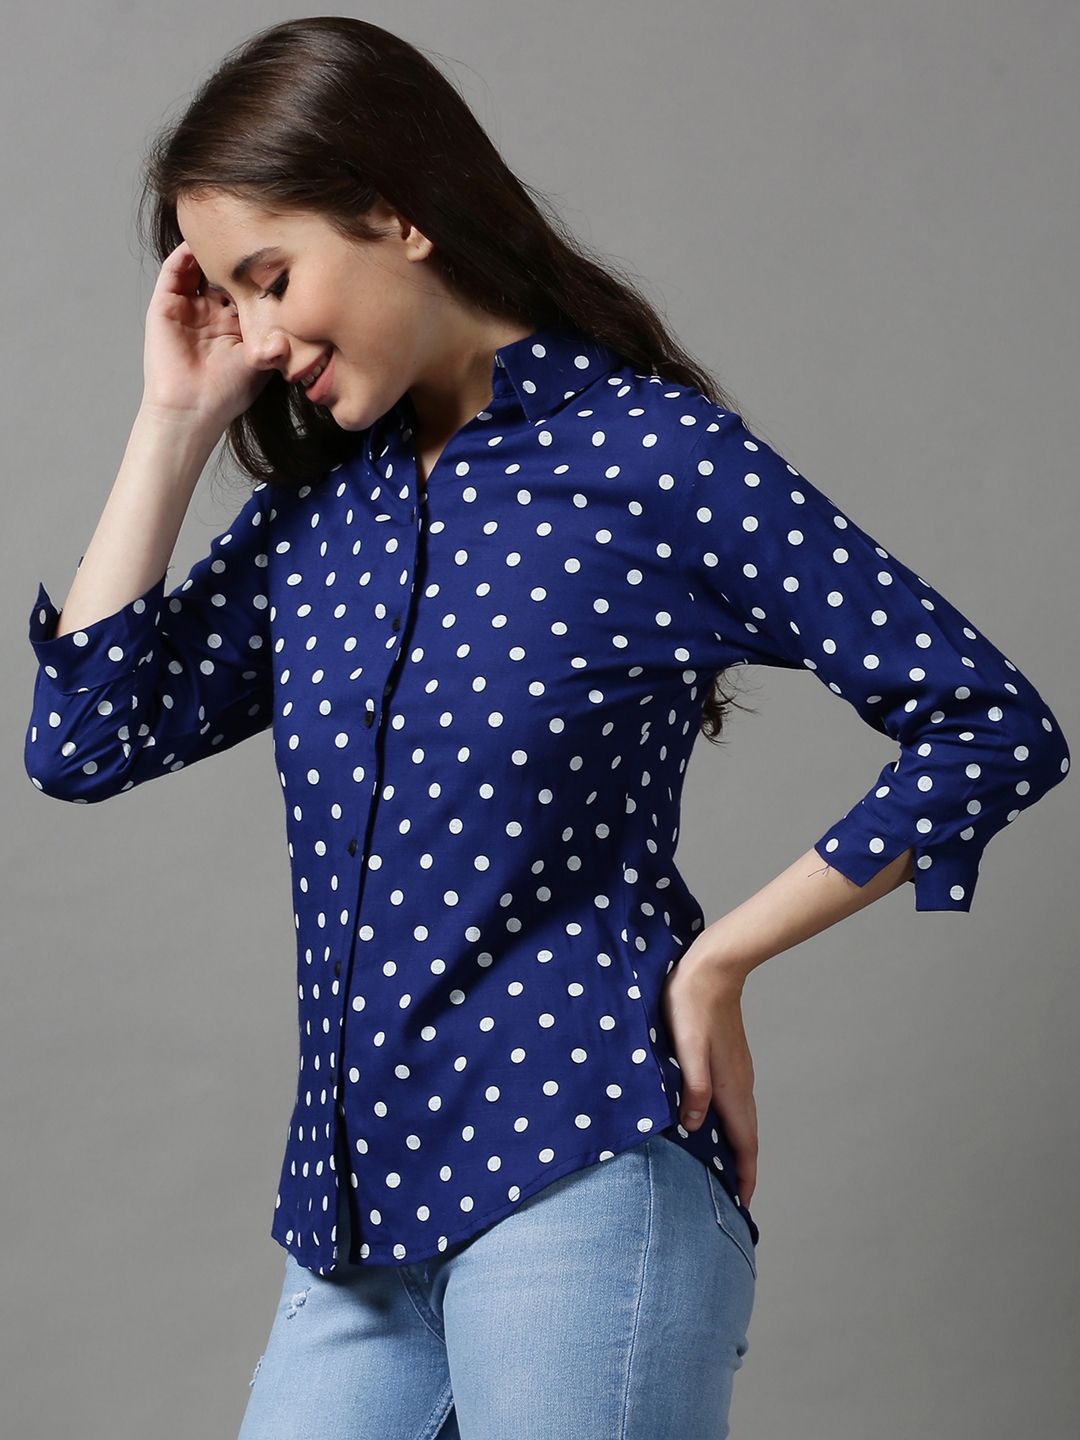 Women's Blue Cotton Printed Casual Shirts